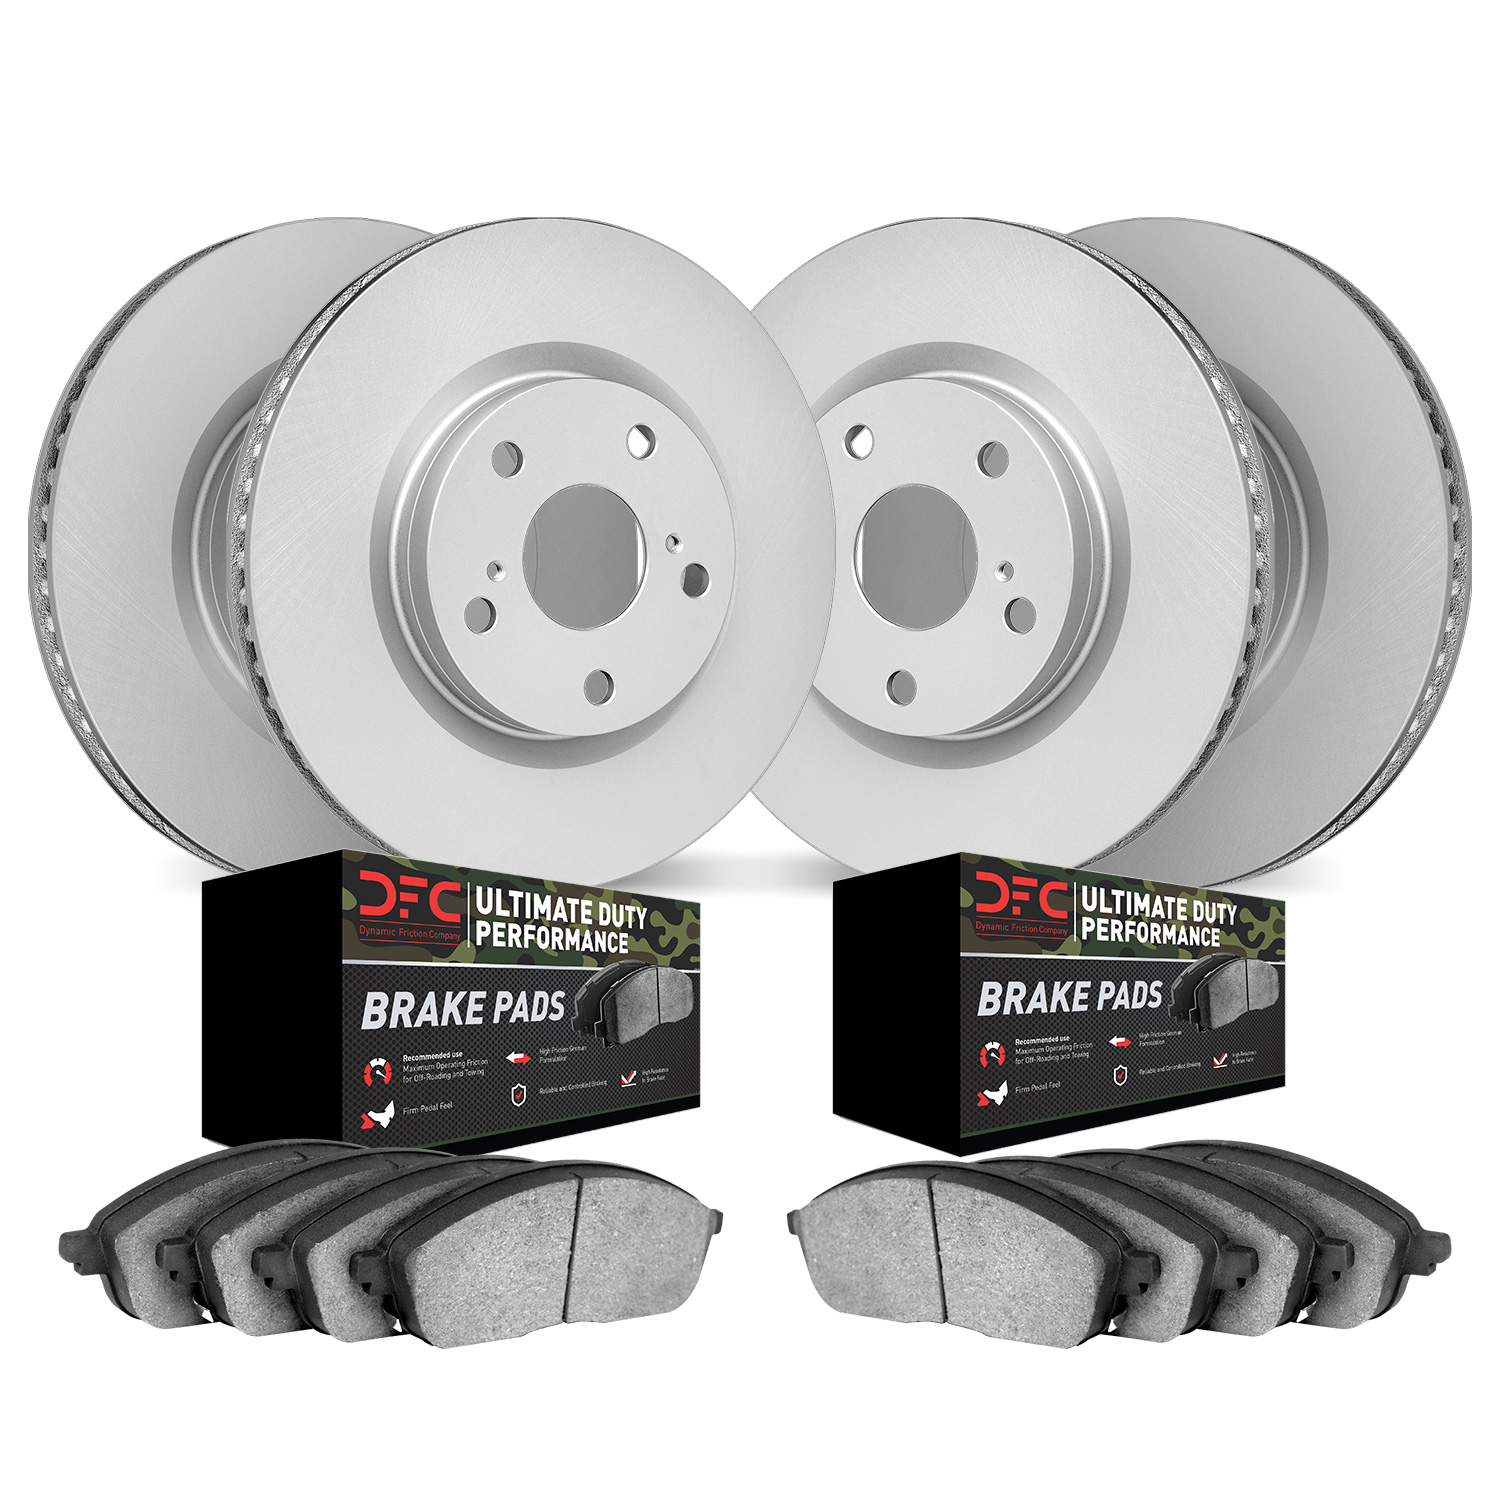 4404-40003 Geospec Brake Rotors with Ultimate-Duty Brake Pads Kit, 2008-2012 Mopar, Position: Front and Rear